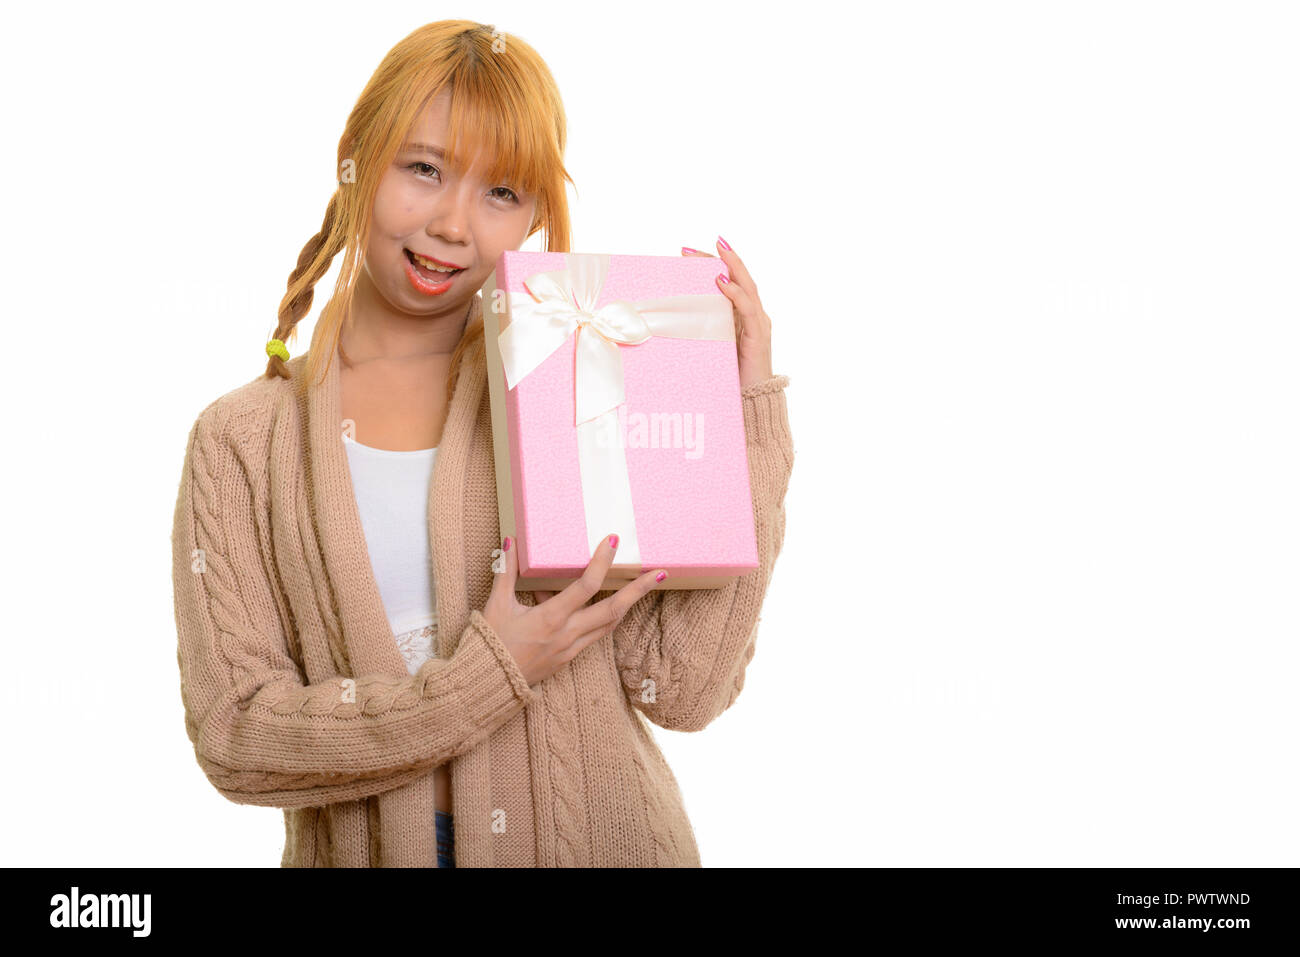 Young happy Asian woman smiling and holding gift box Banque D'Images